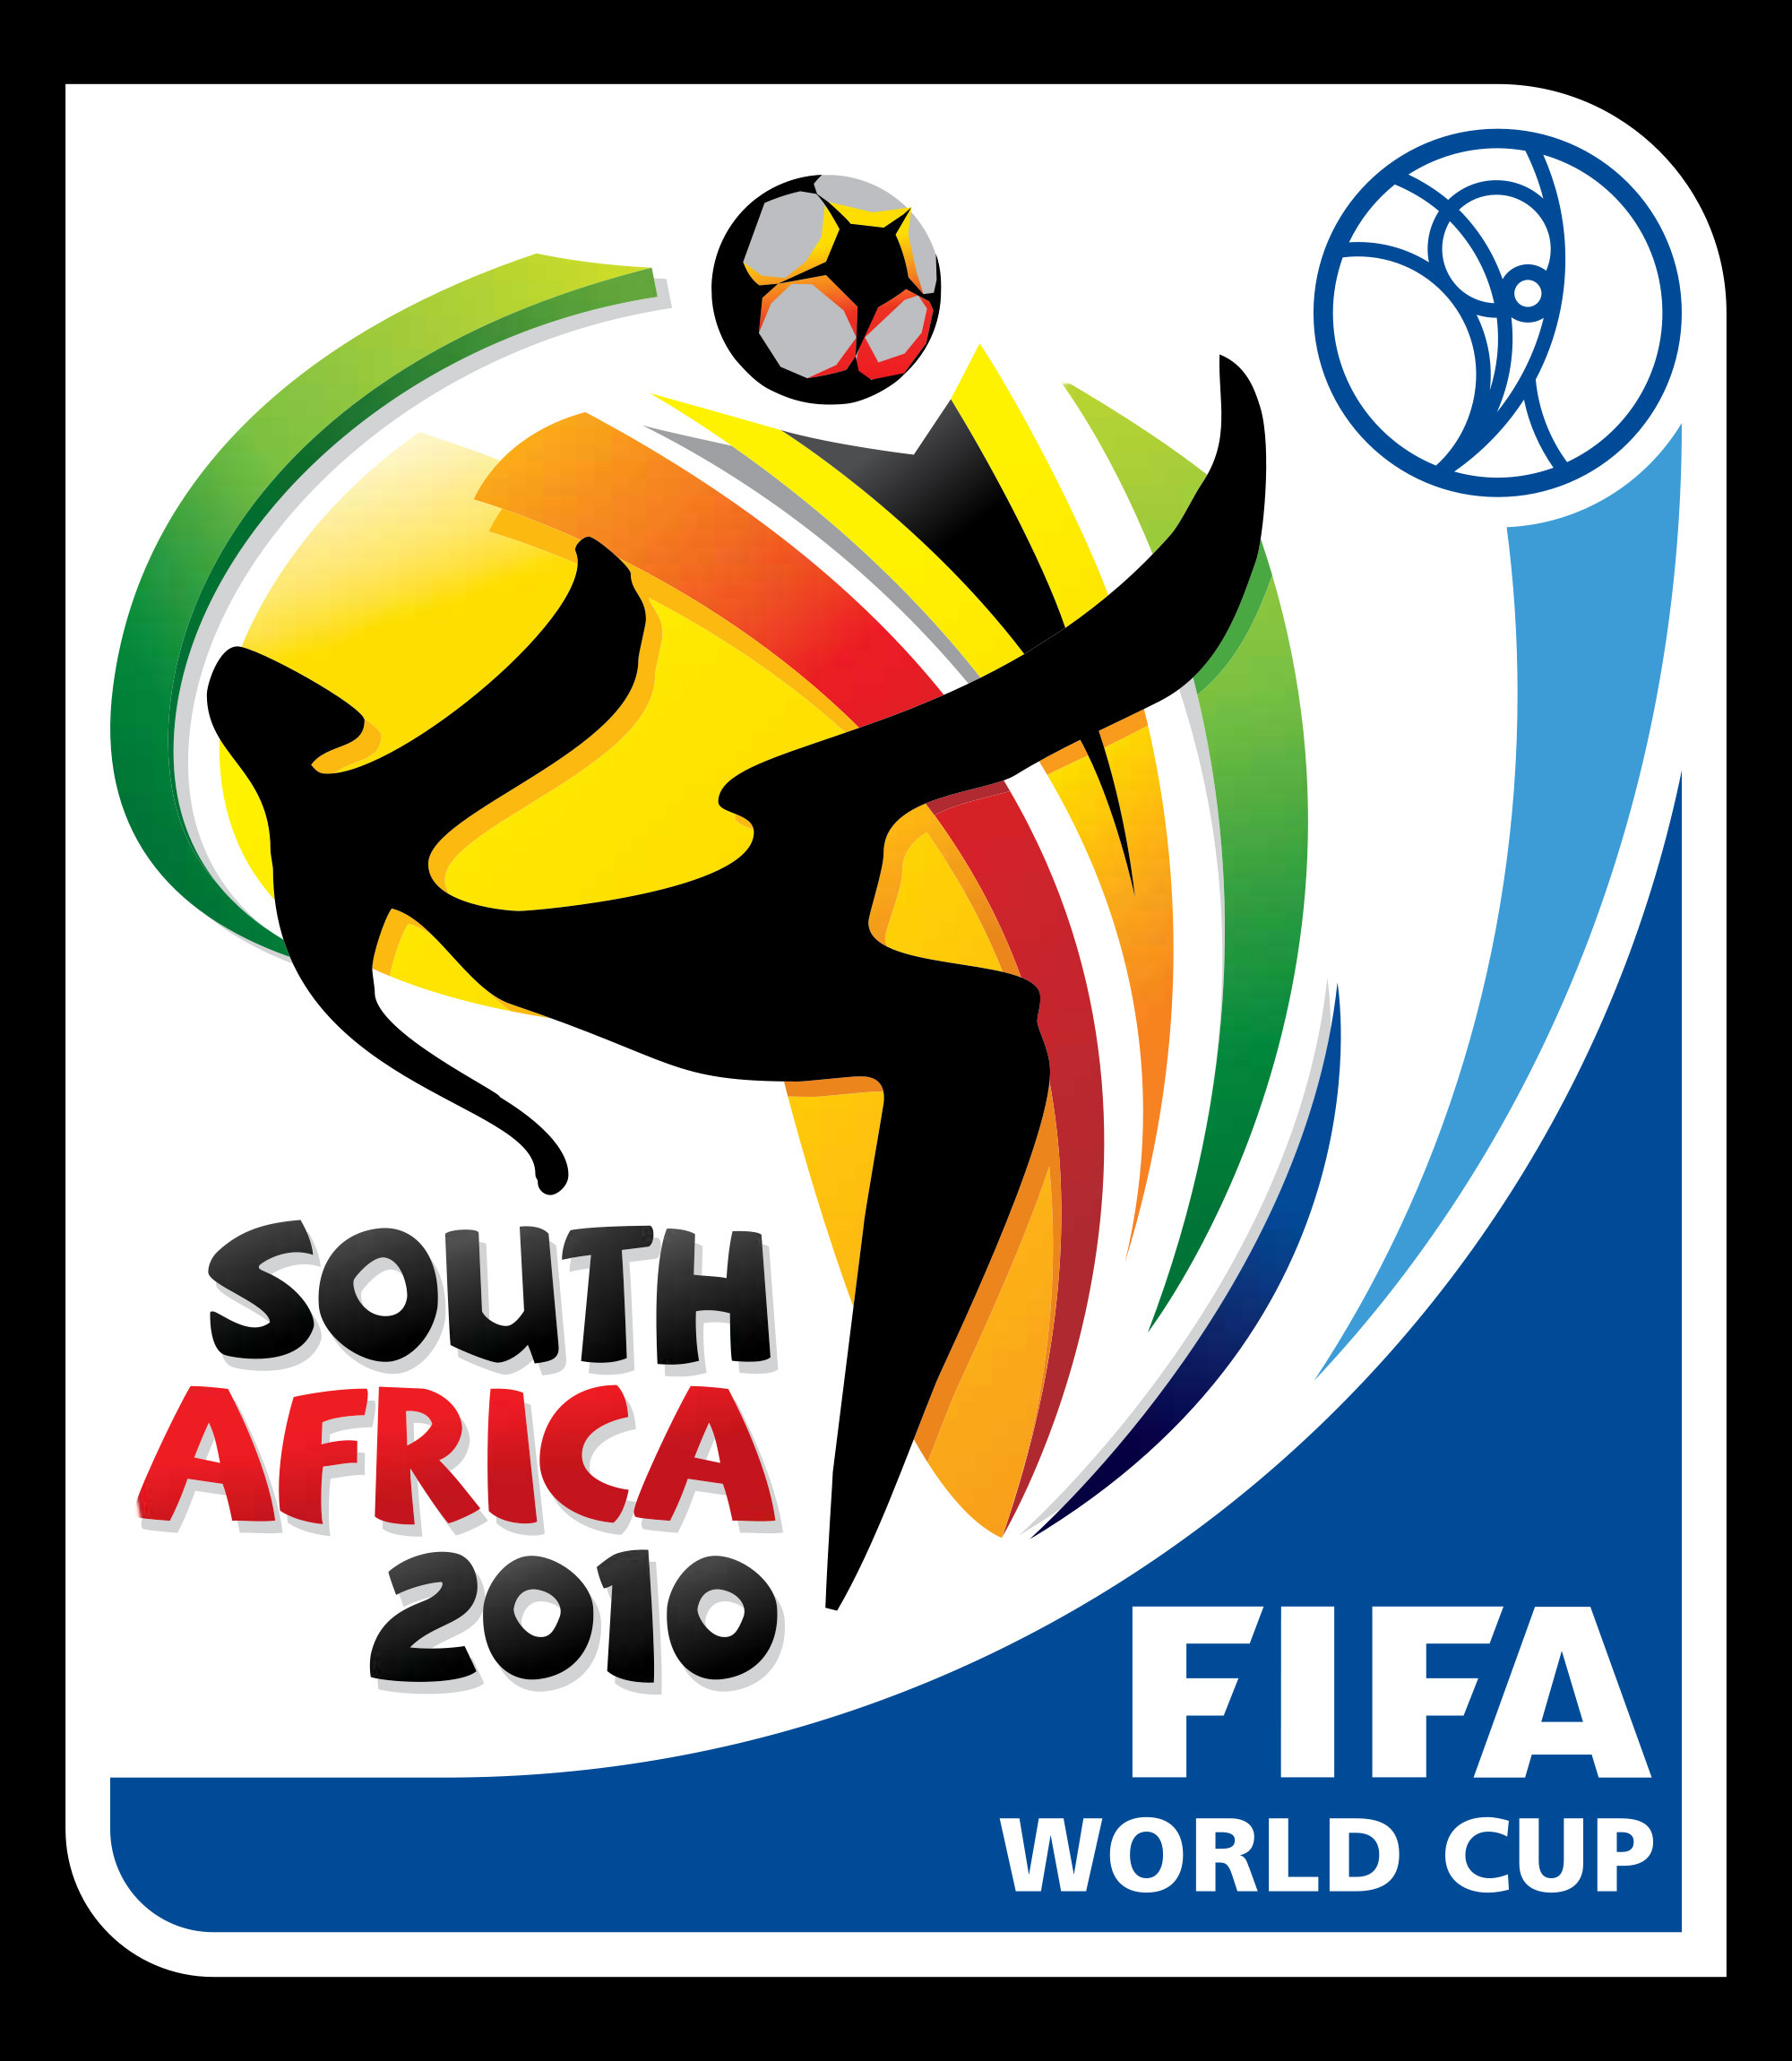 world cup 2010 - FIFA World Cup South Africa 2010 Photo (12888897) - Fanpop